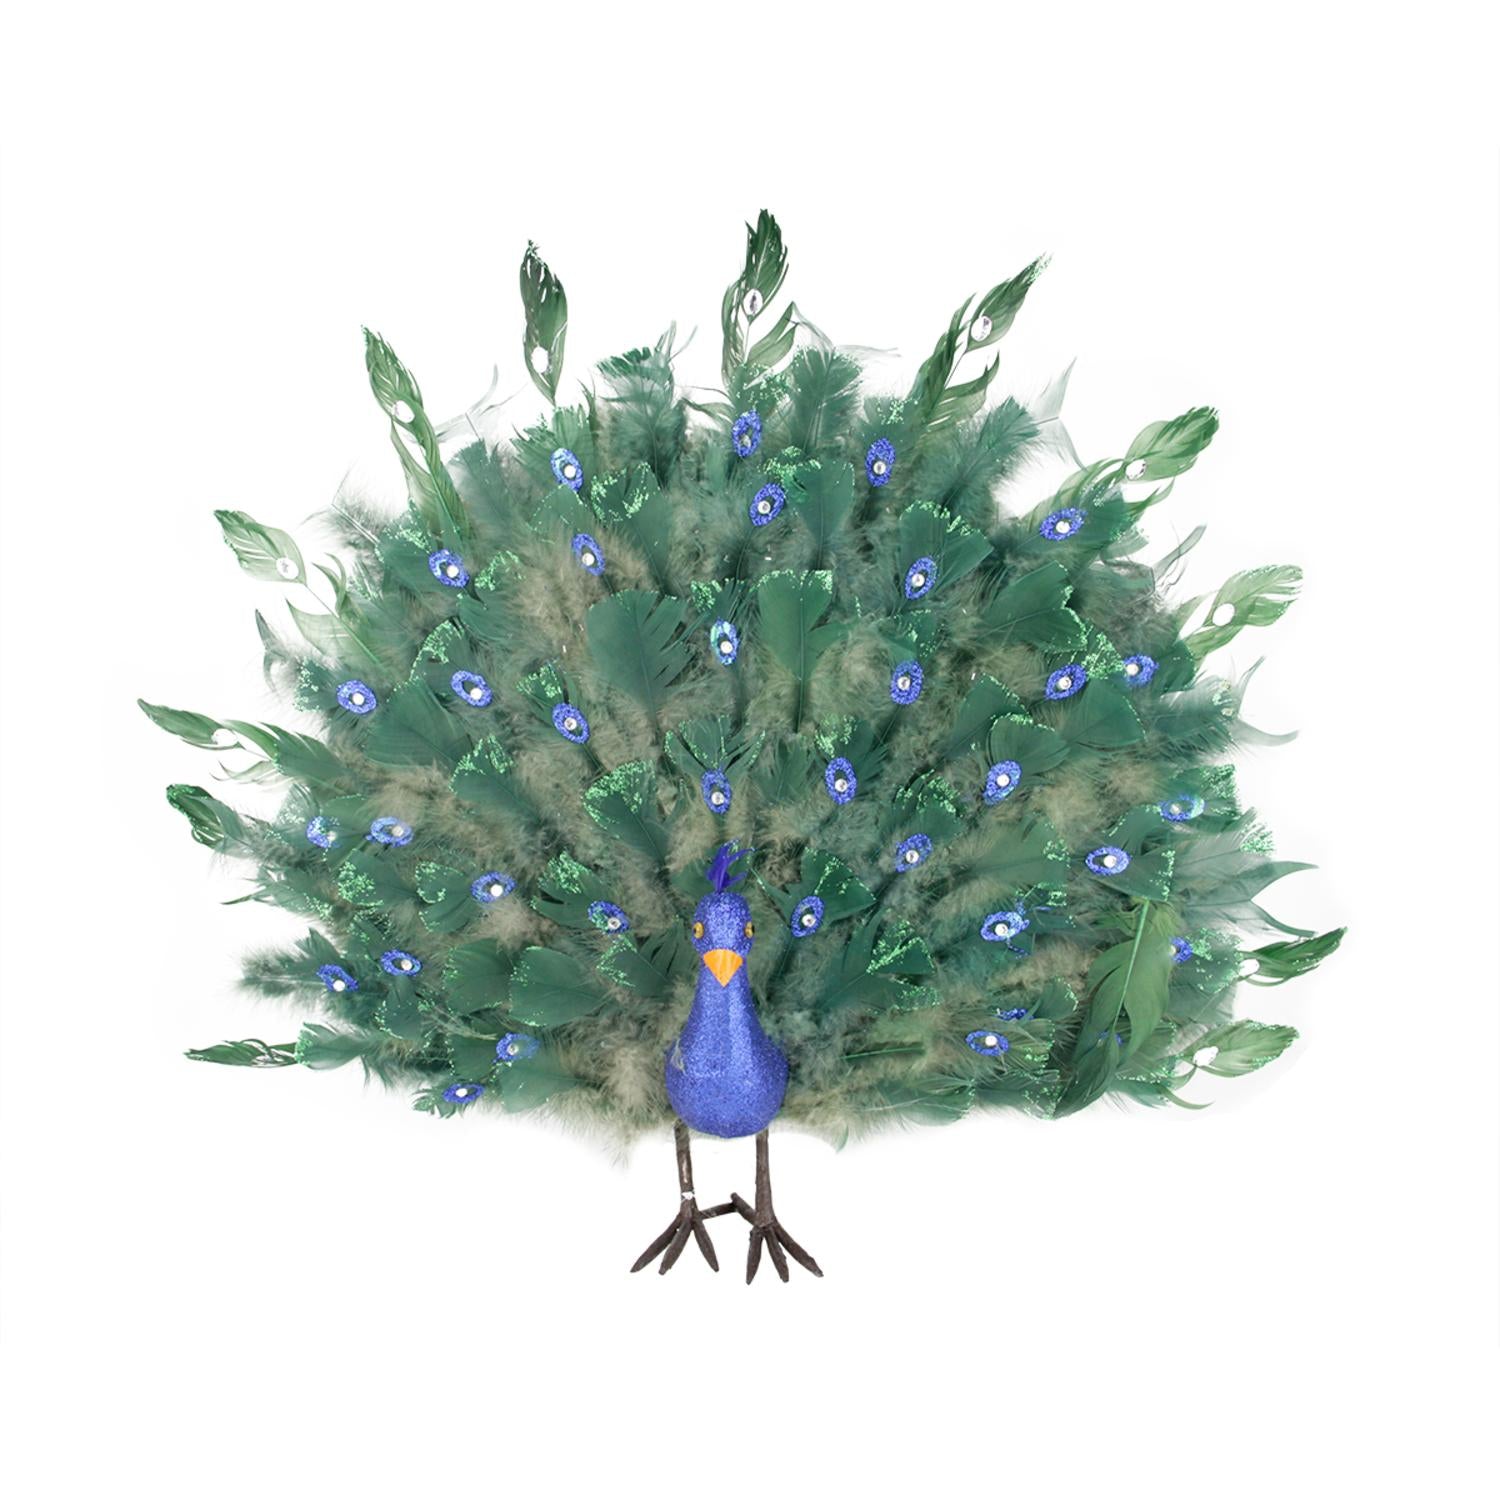 2' Colorful Green Regal Peacock Bird with Open Tail Feathers Christmas Decoration